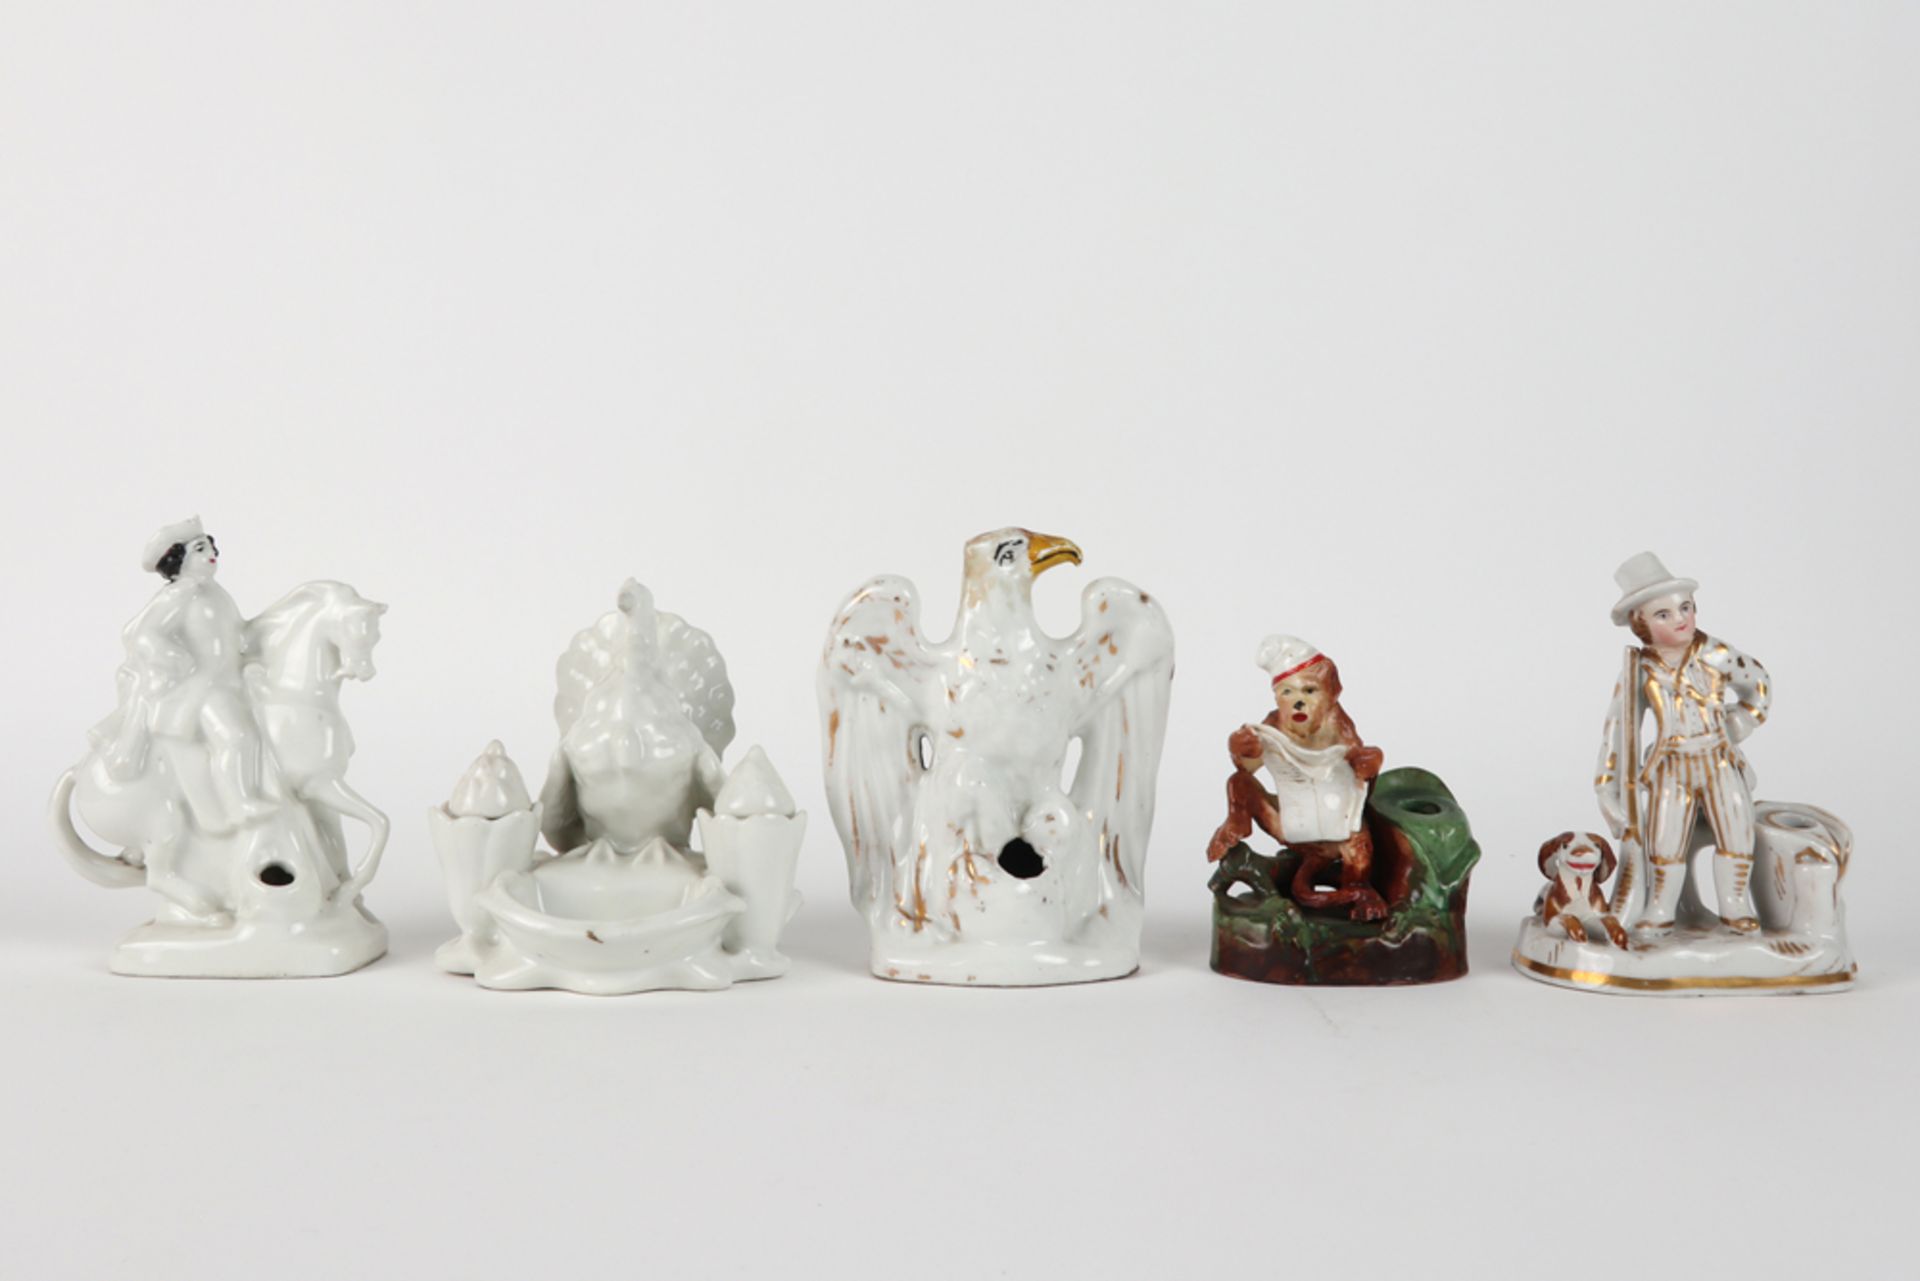 five antique inkstands in porcelain, each depicting an animal